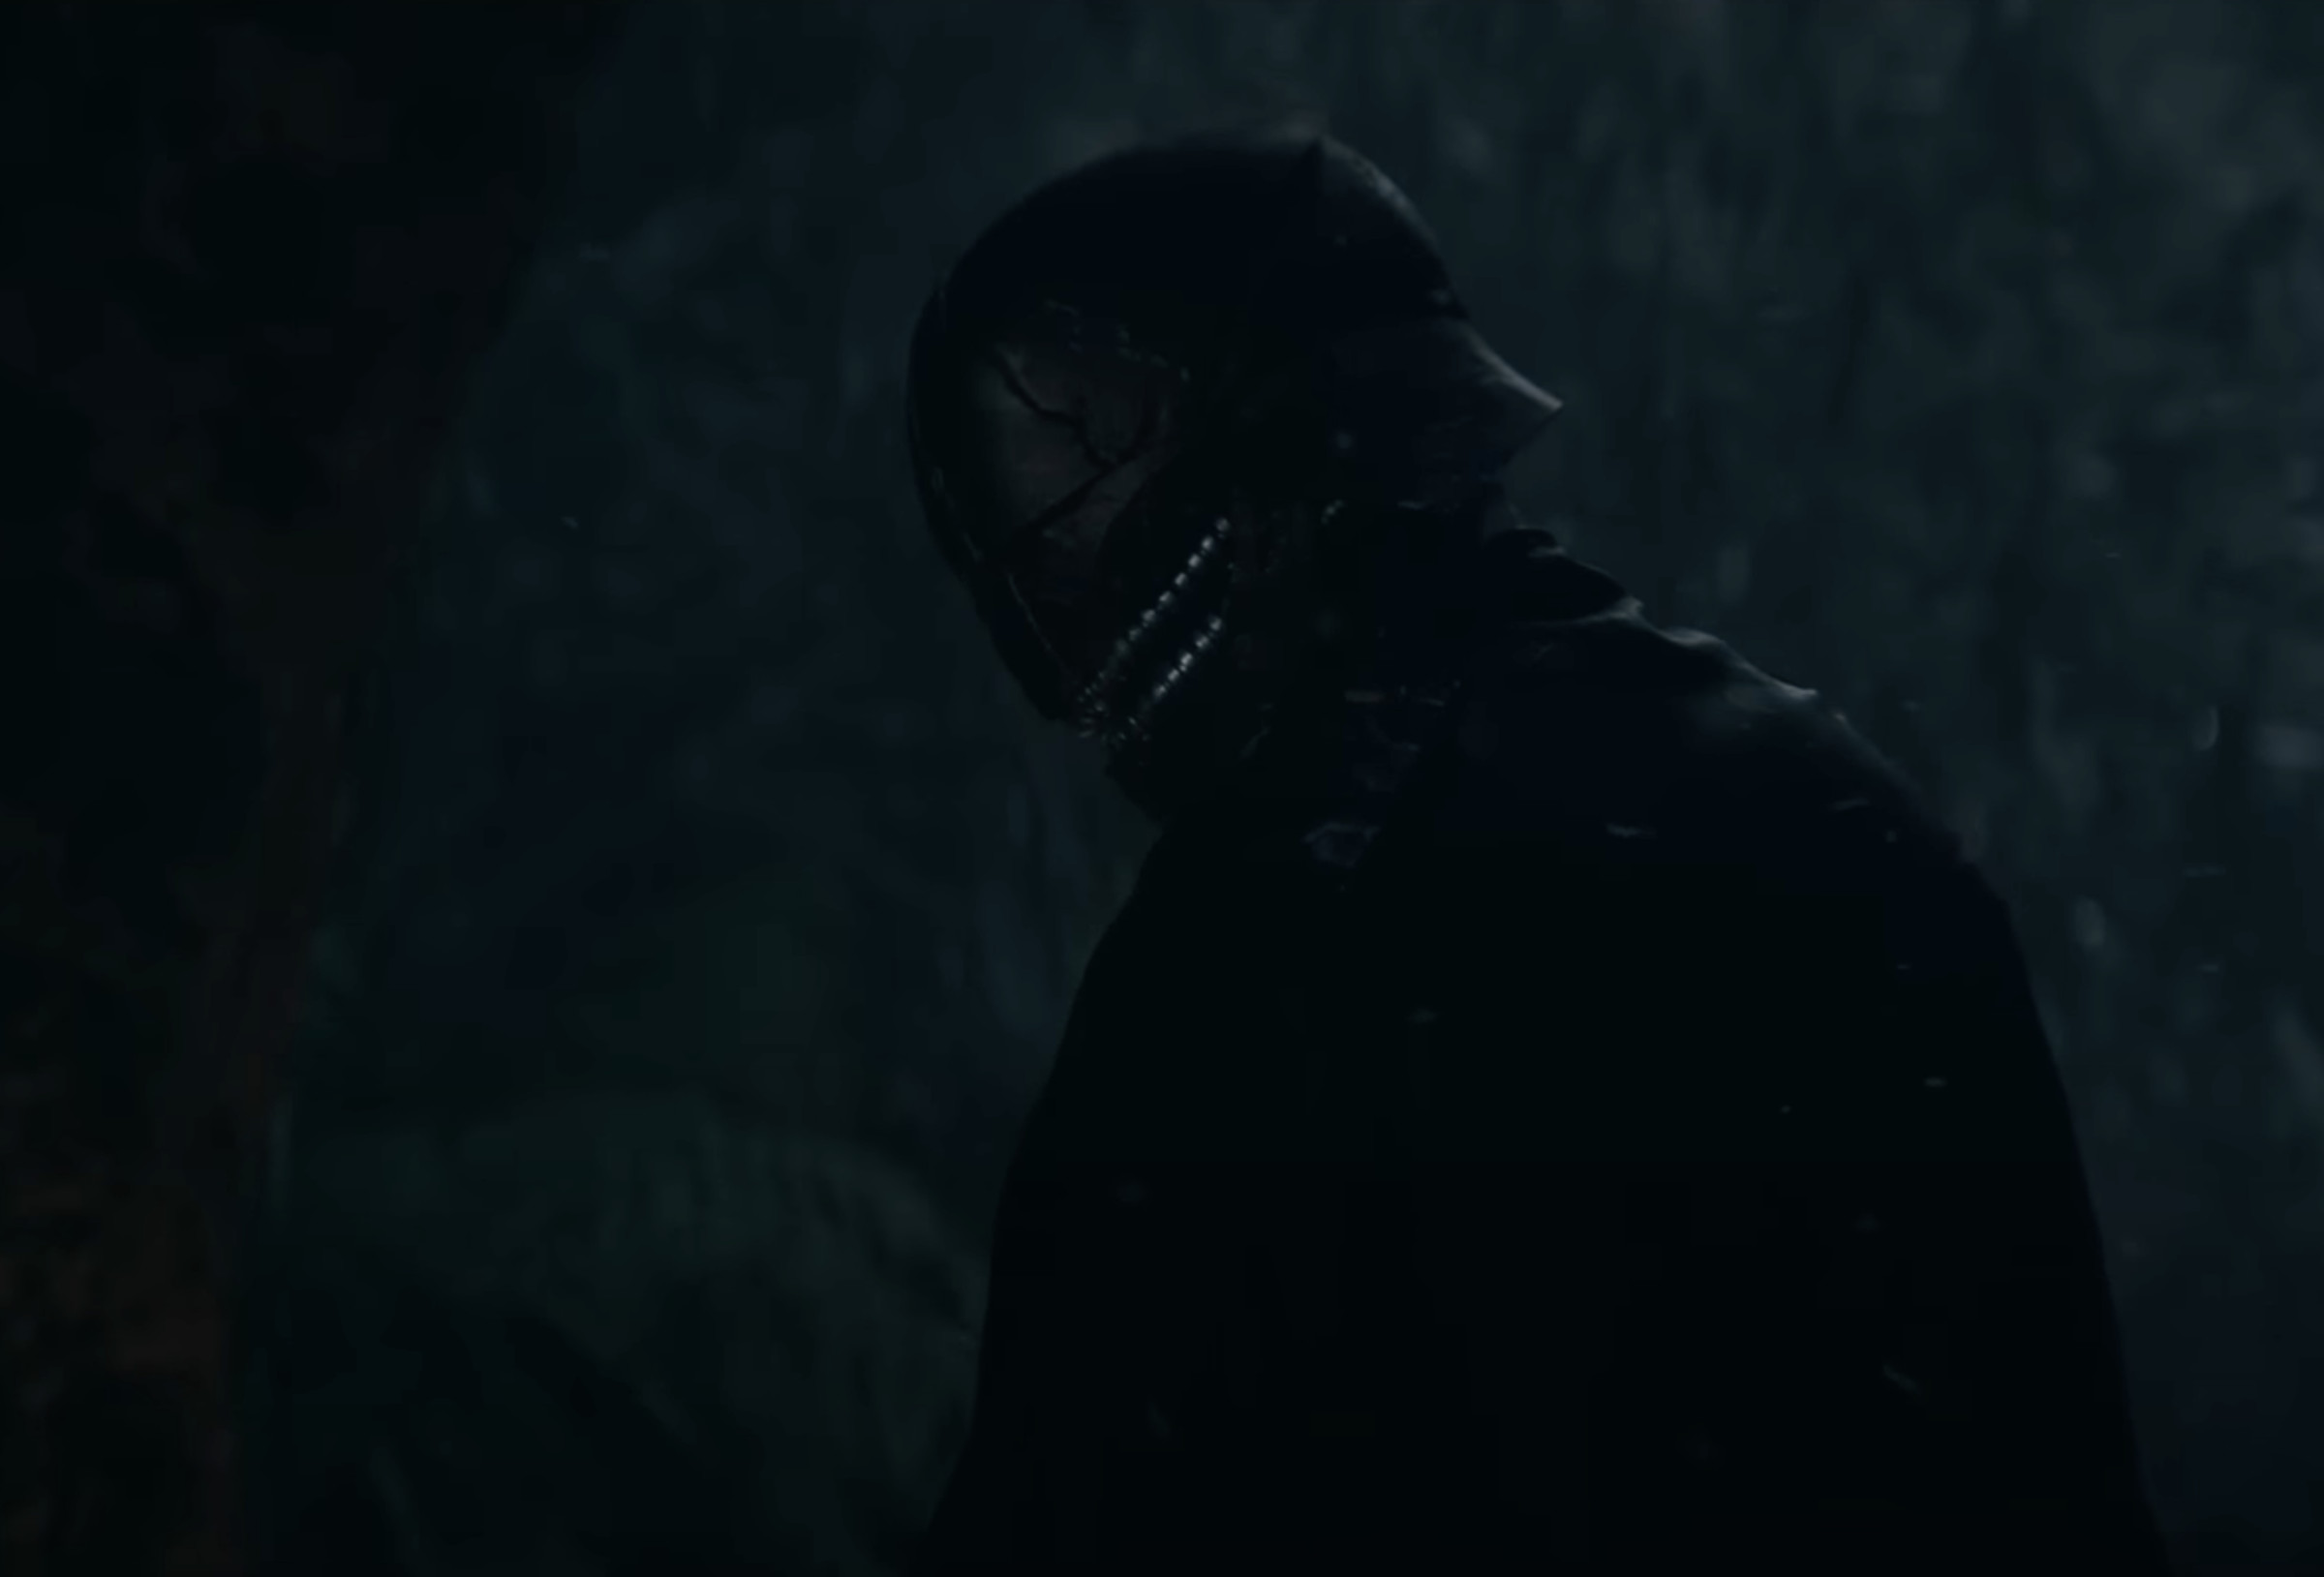 A screenshot shows the new villain, who wears a helmet that has two rows of zipper-like teeth on the lower half.